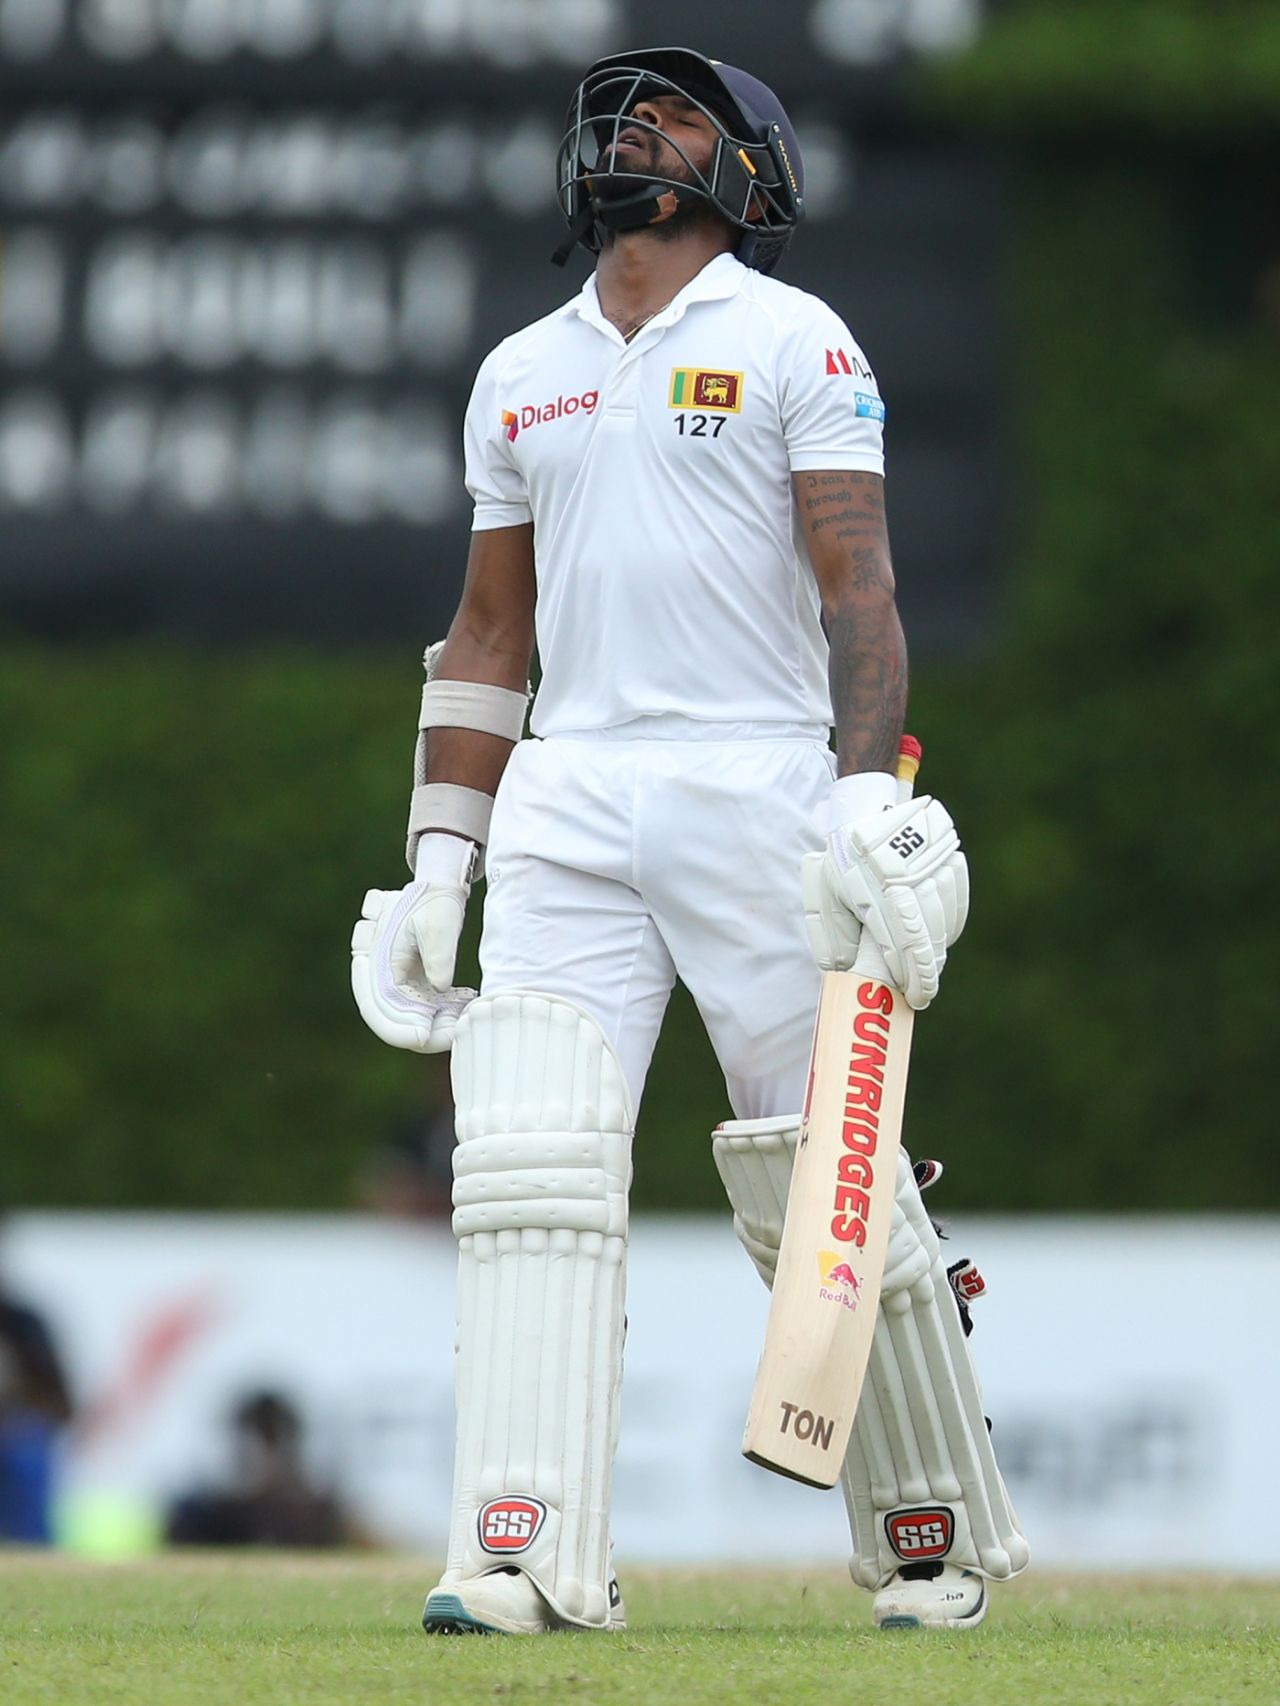 Niroshan Dickwella was dejected after being dismissed, Sri Lanka v New Zealand, 2nd Test, Colombo (PSS), Day 5, August 26, 2019